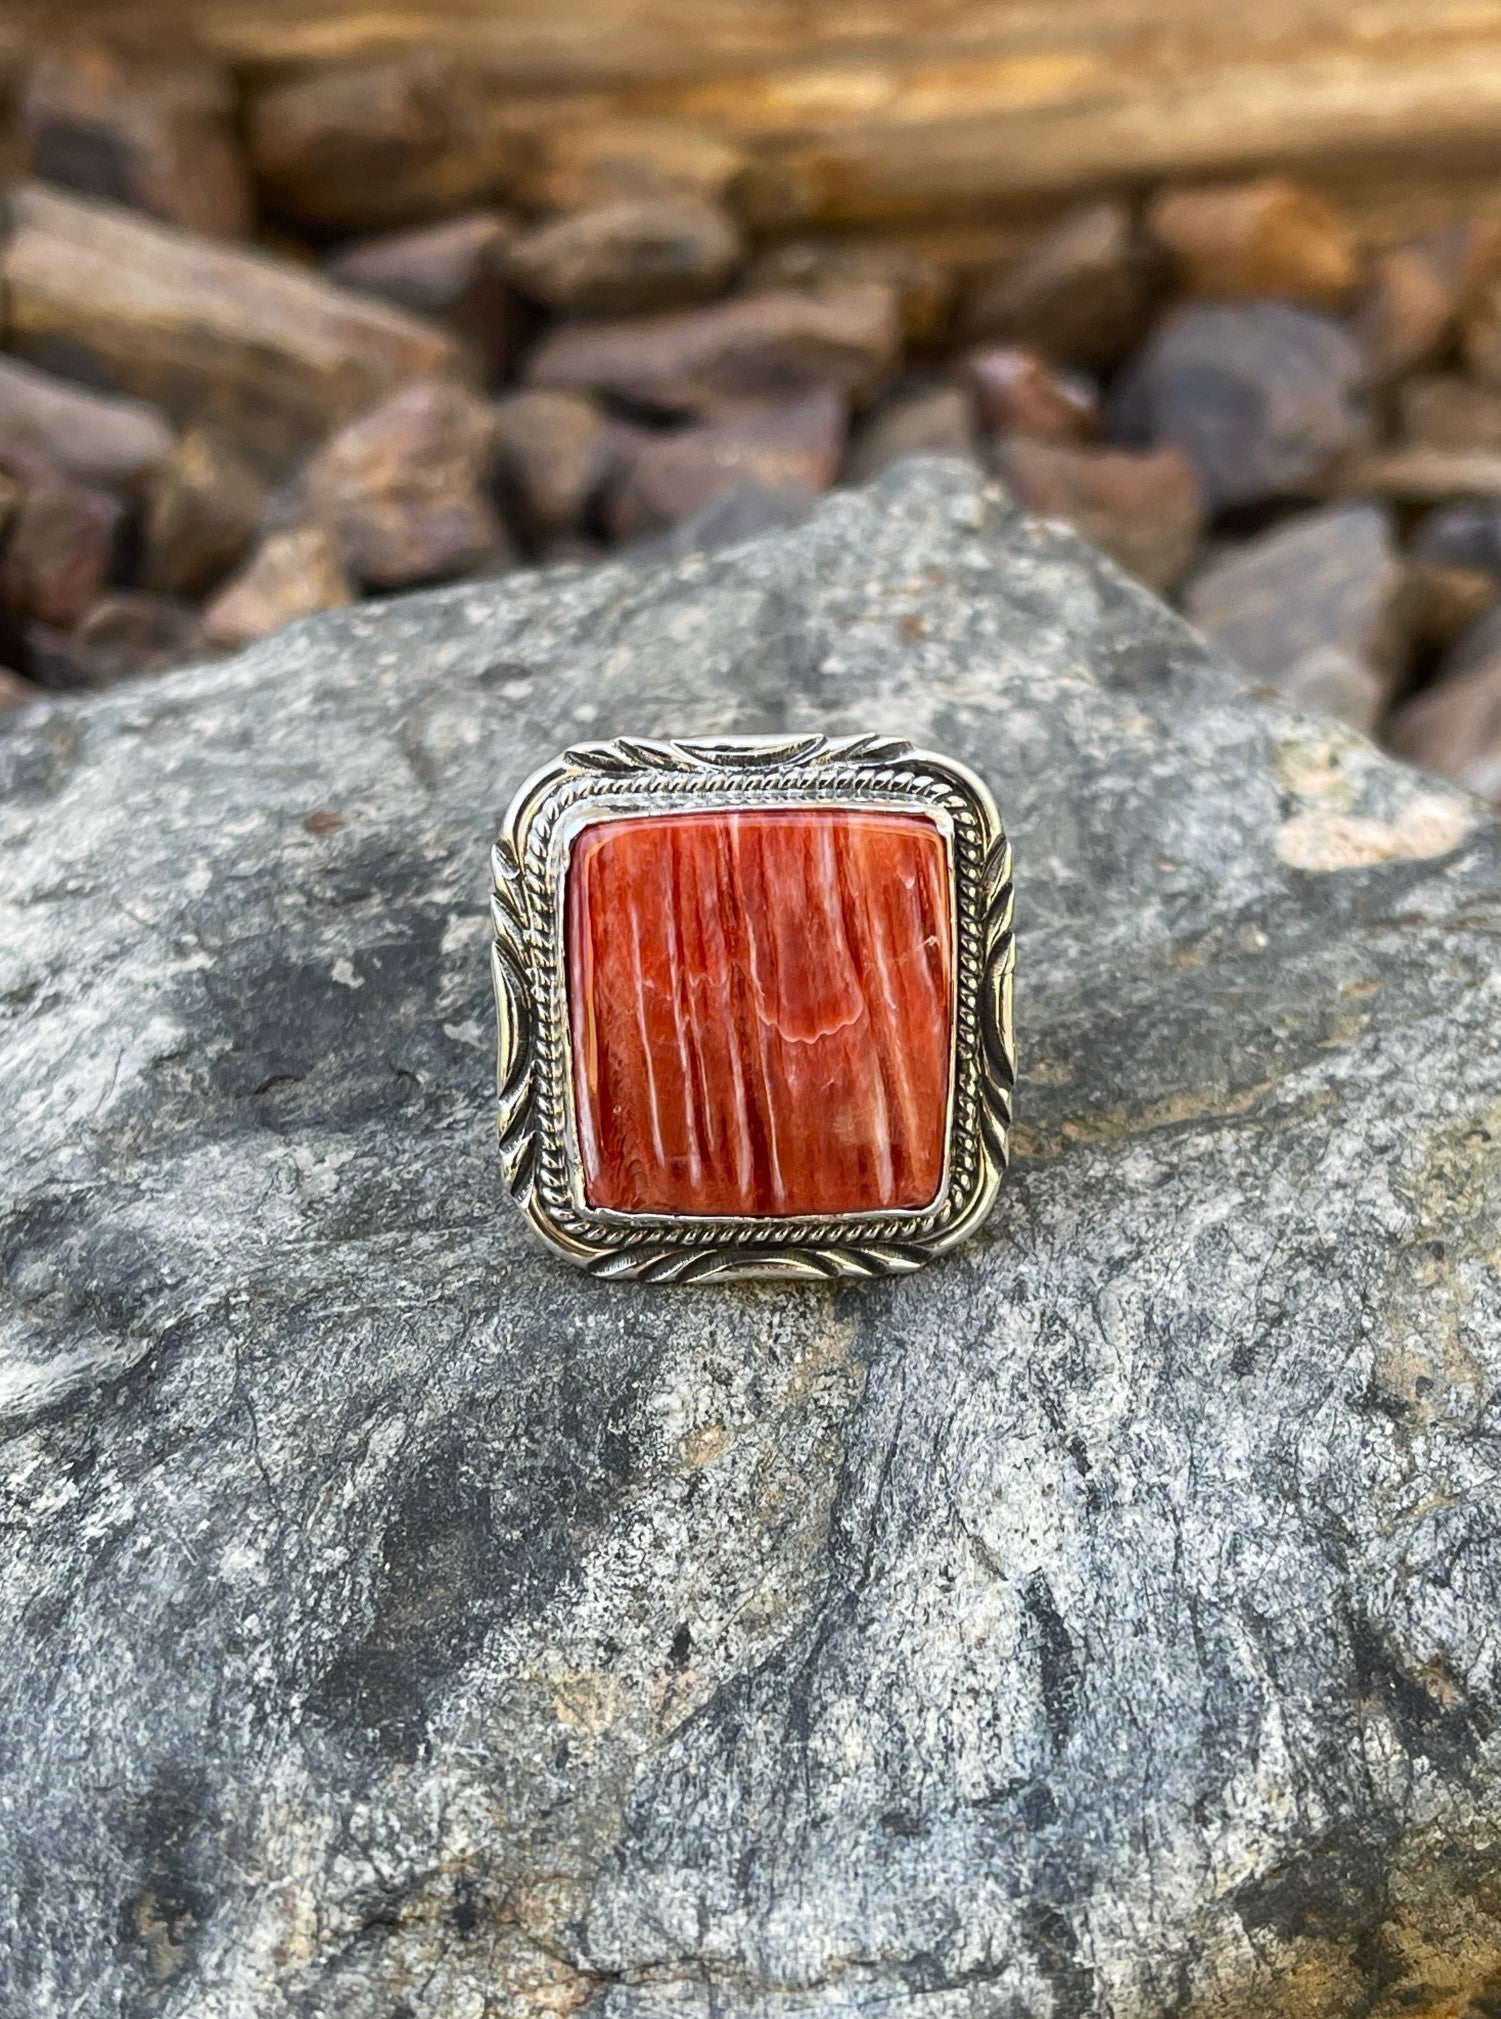 Handmade Sterling Silver Square Cut Red Spiny Oyster Ring with Stamp Trim - Size 7 1/2